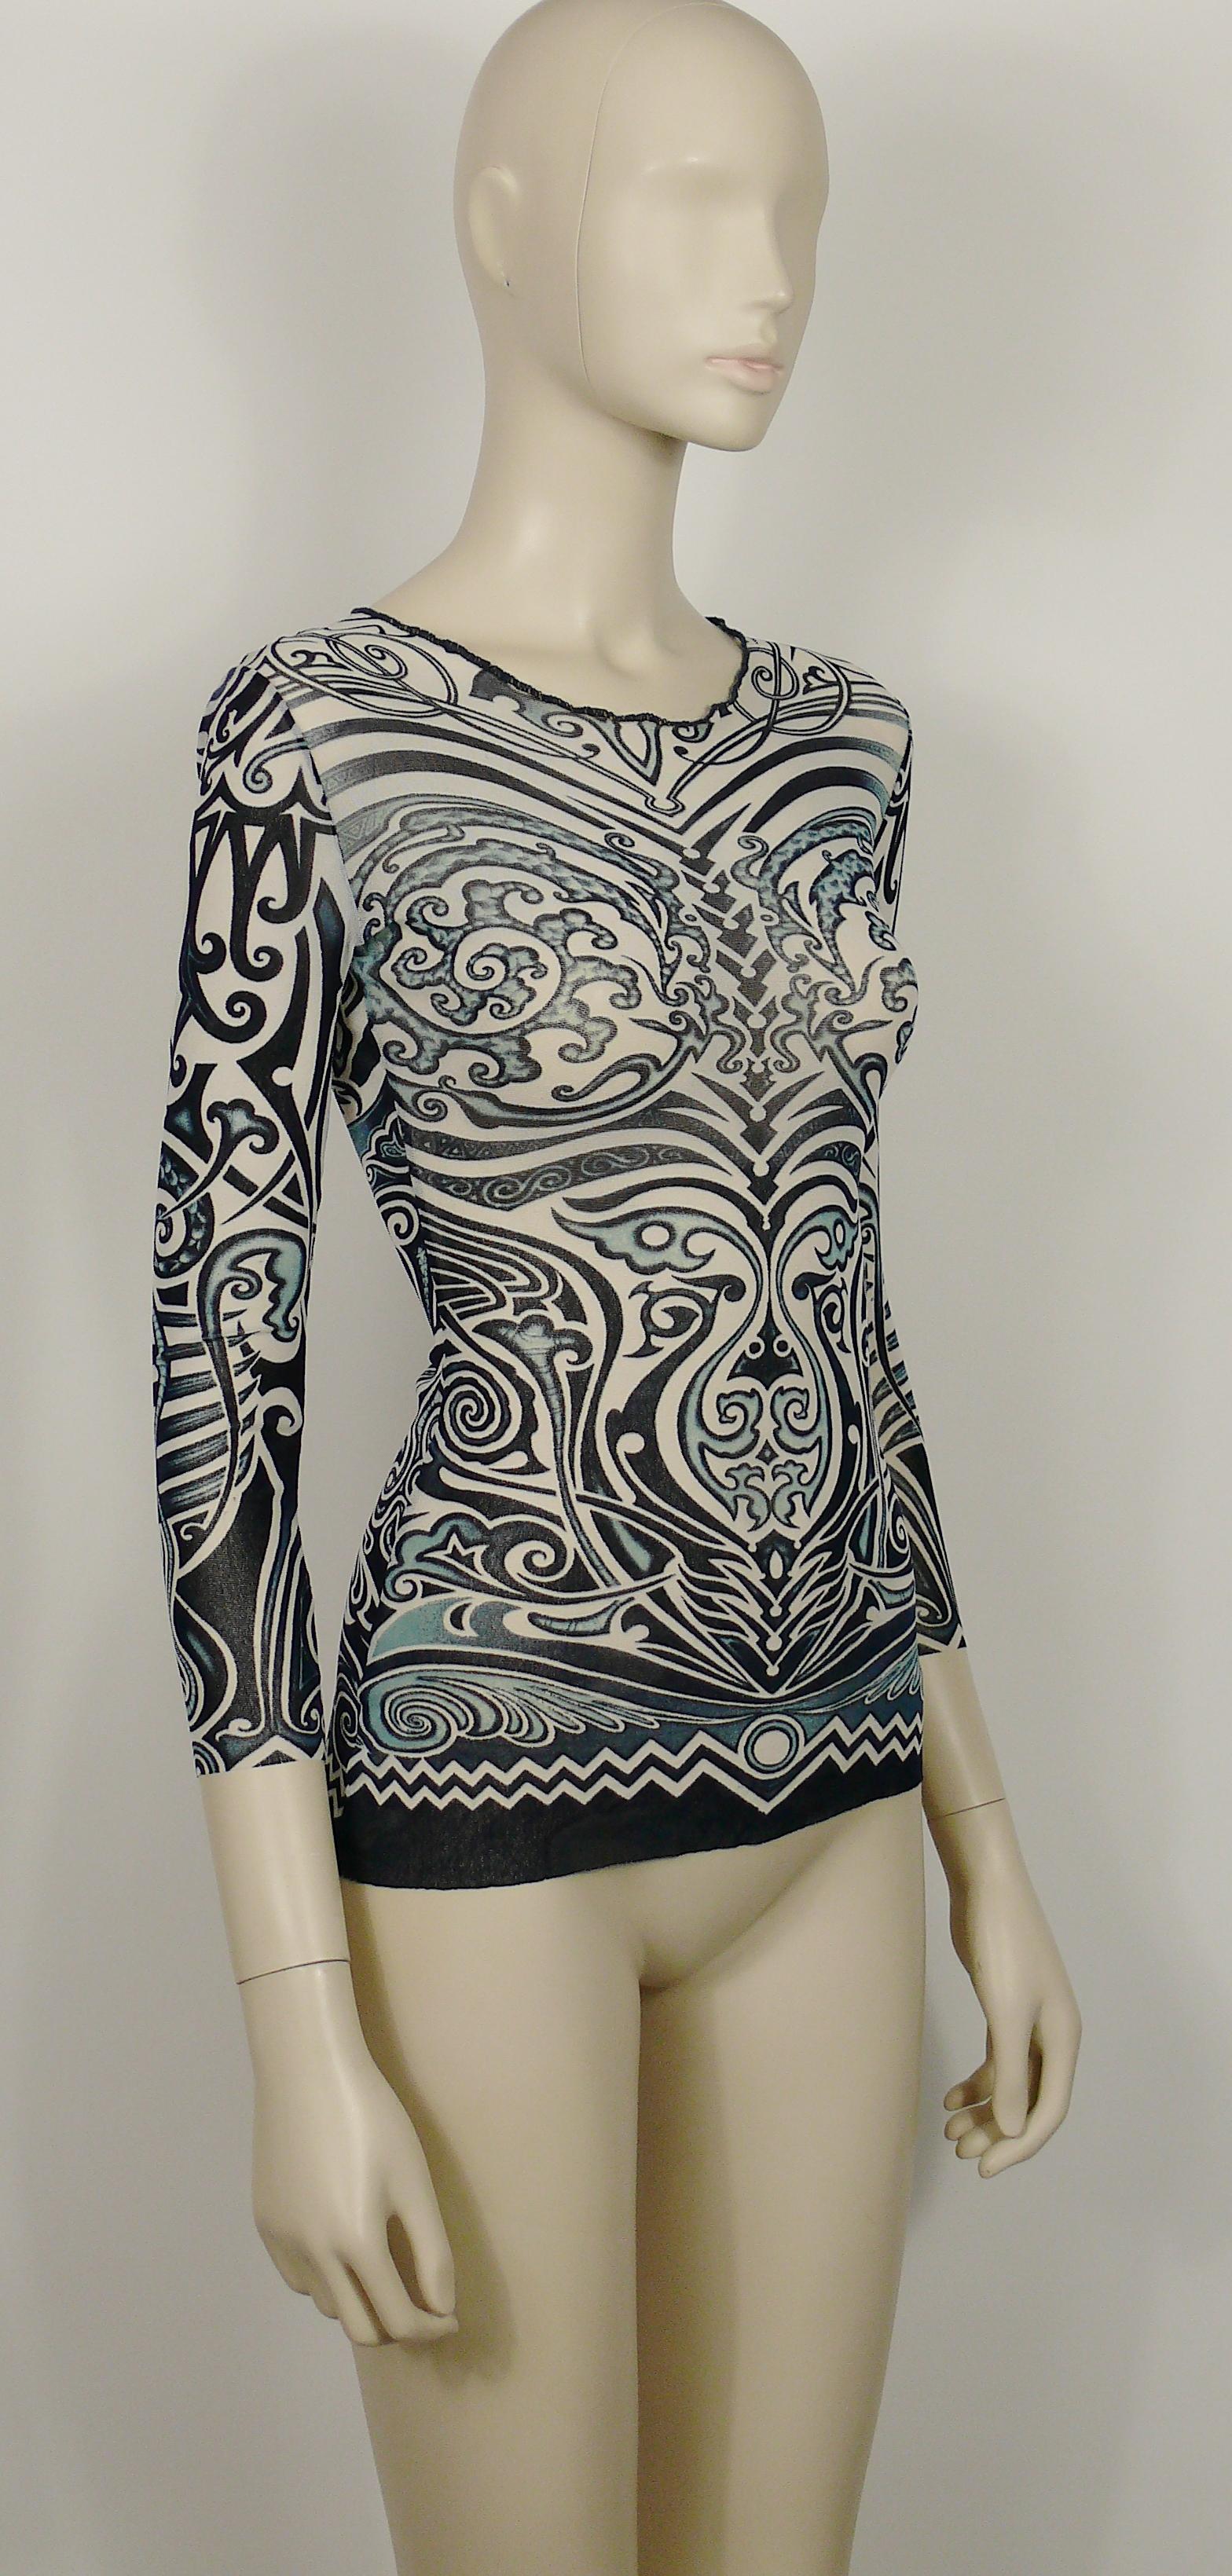 JEAN PAUL GAULTIER vintage iconic sheer mesh tribal tattoo print top in shades of blue on a white background.

Spring/Summer 1996 Collection.

Label reads JEAN PAUL GAULTIER Maille.
Made in Italy.

Size label reads : S.
Please refer to